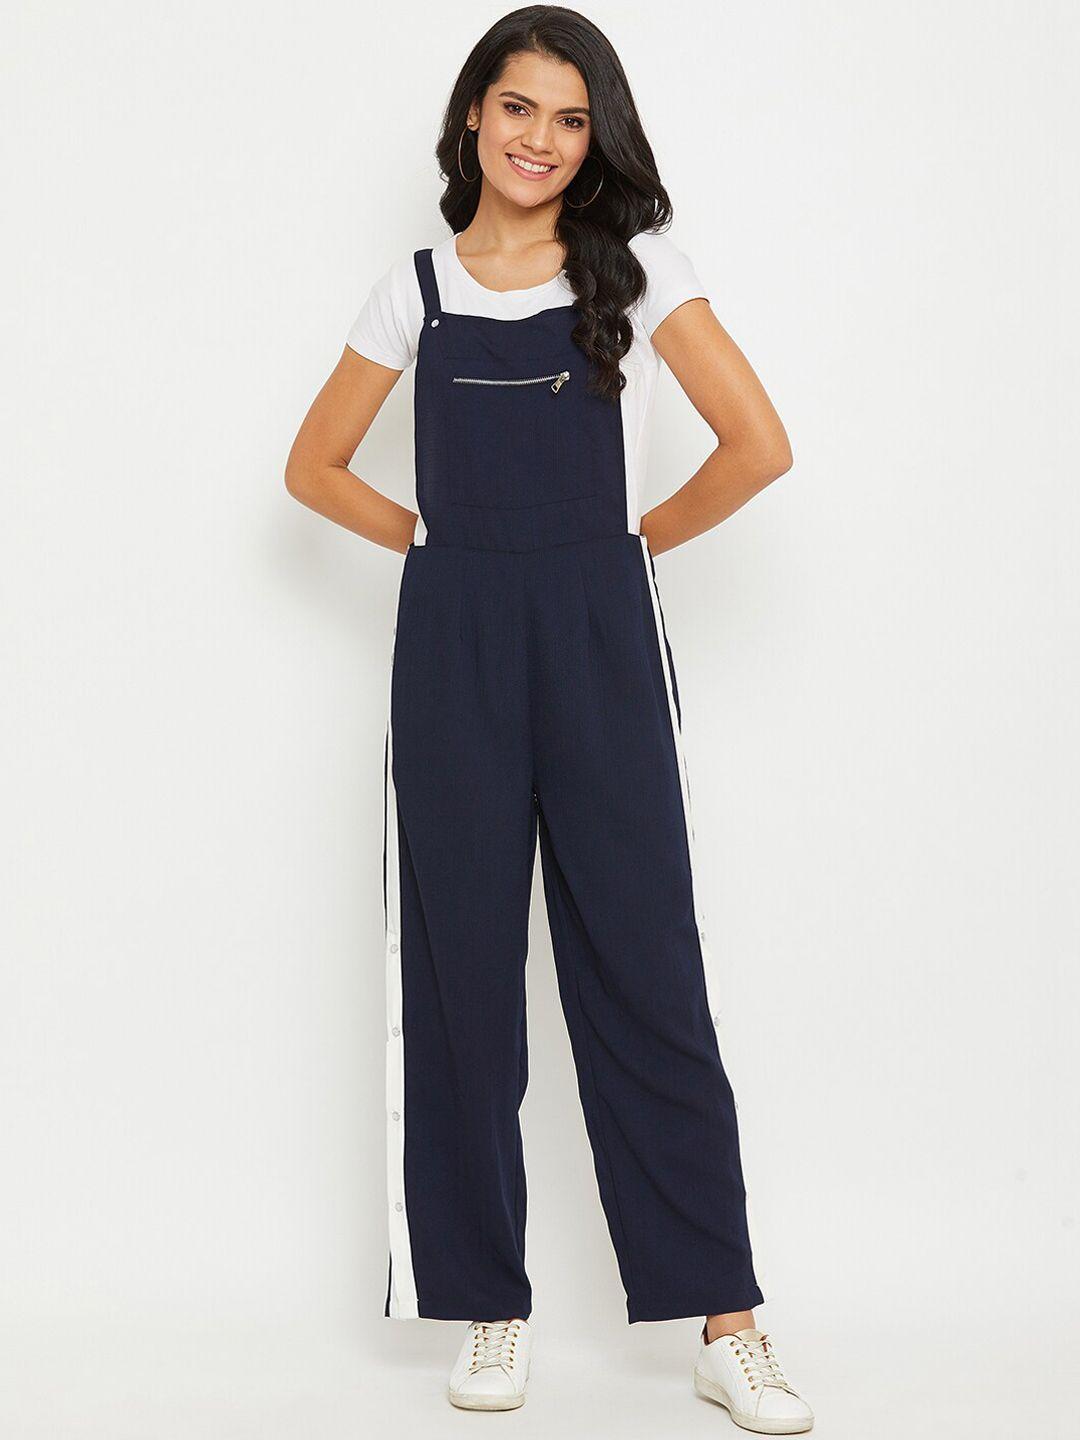 panit-women-navy-blue-solid-dungarees